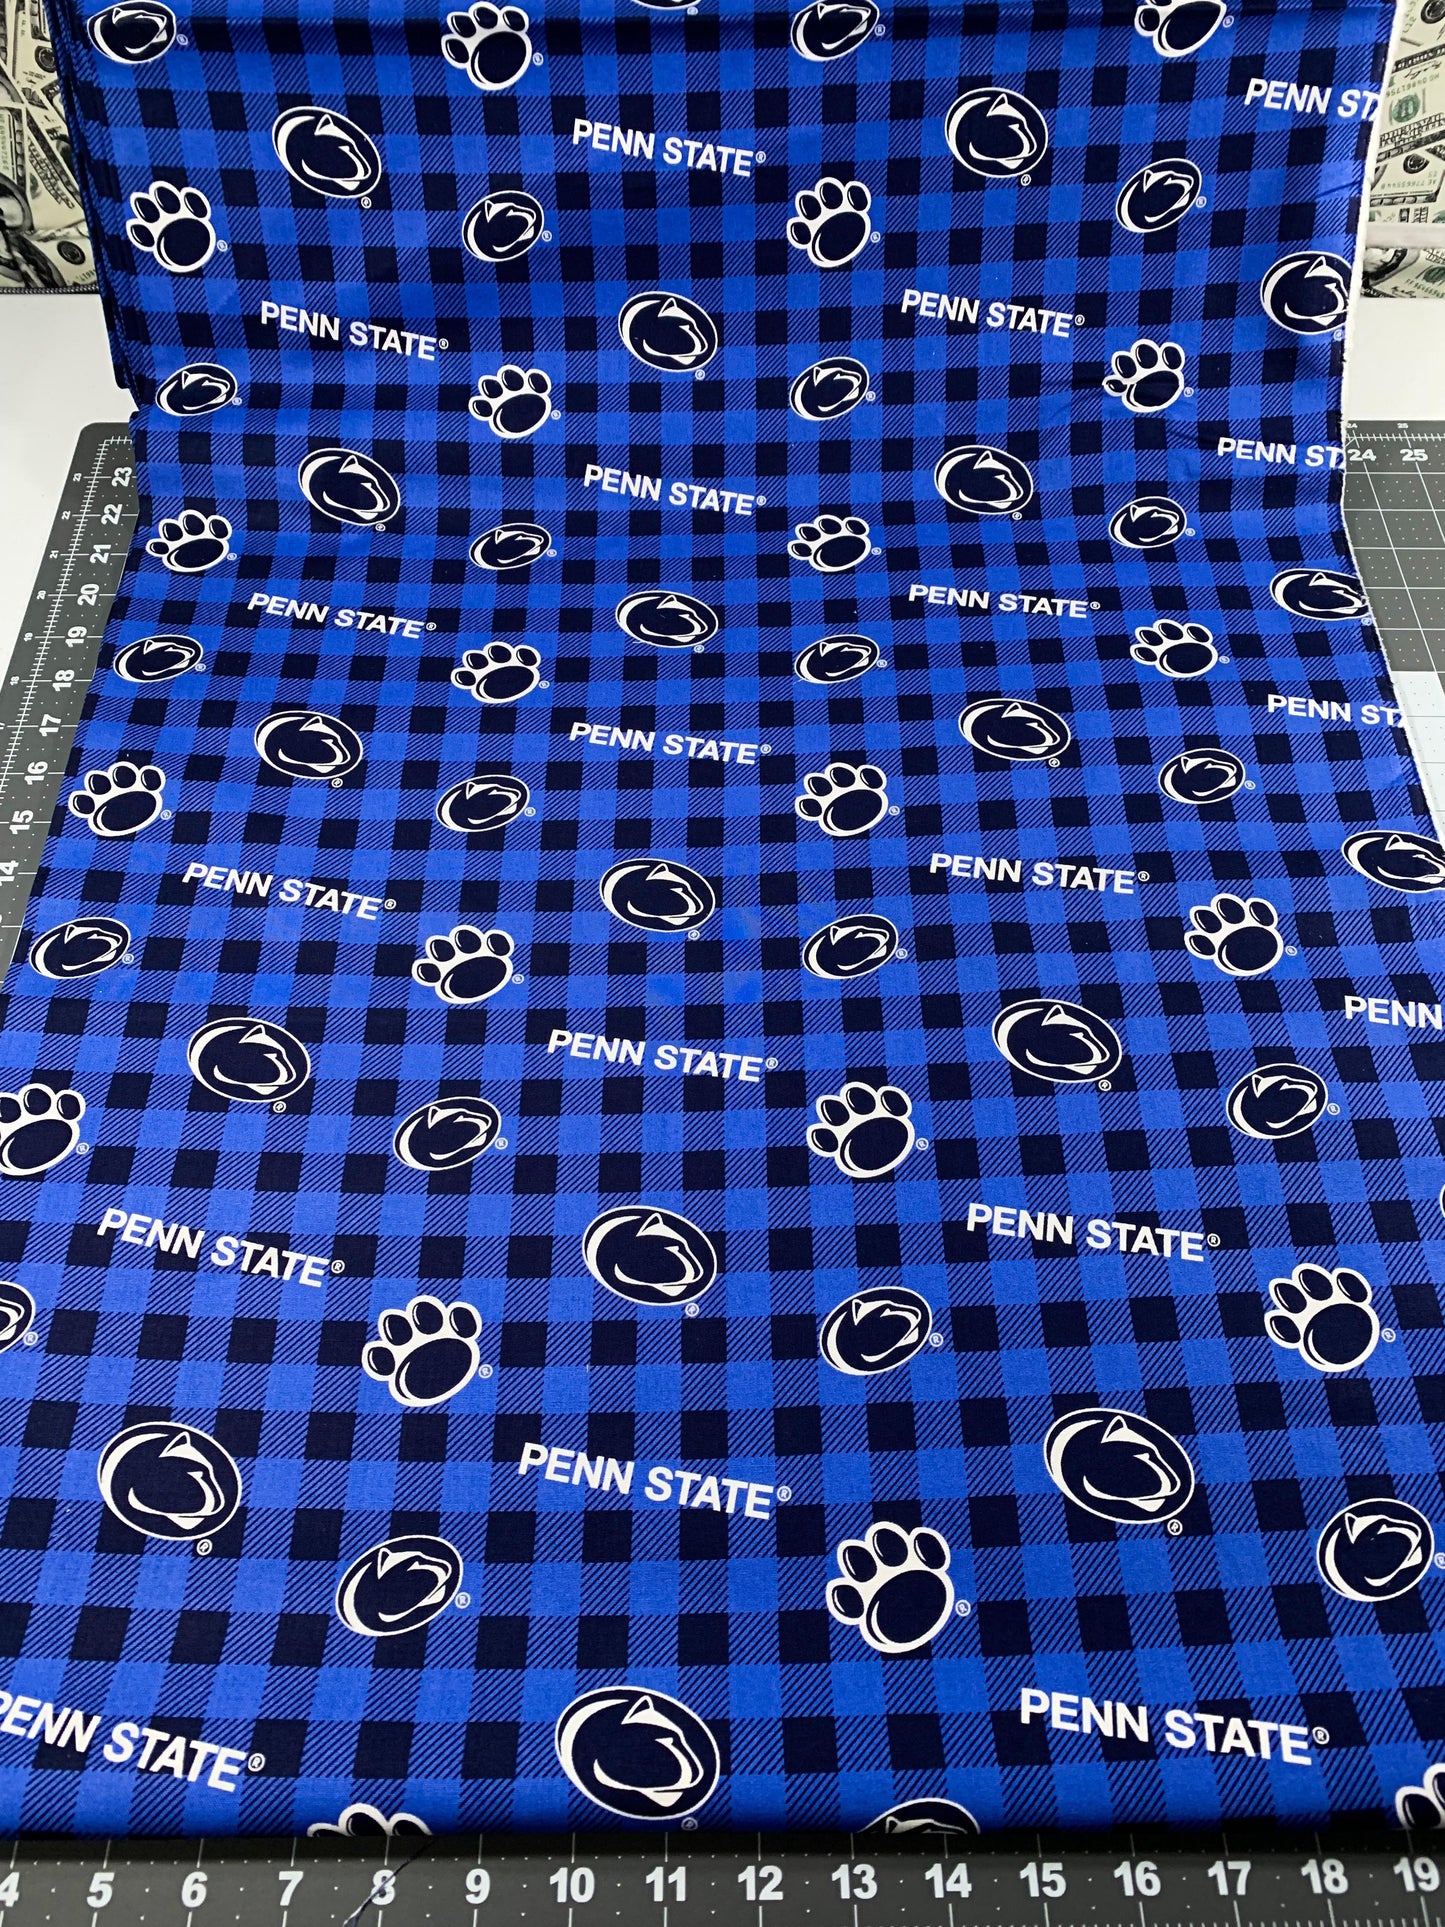 Plaid Penn State fabric PS1207 Nittany Lion fabric